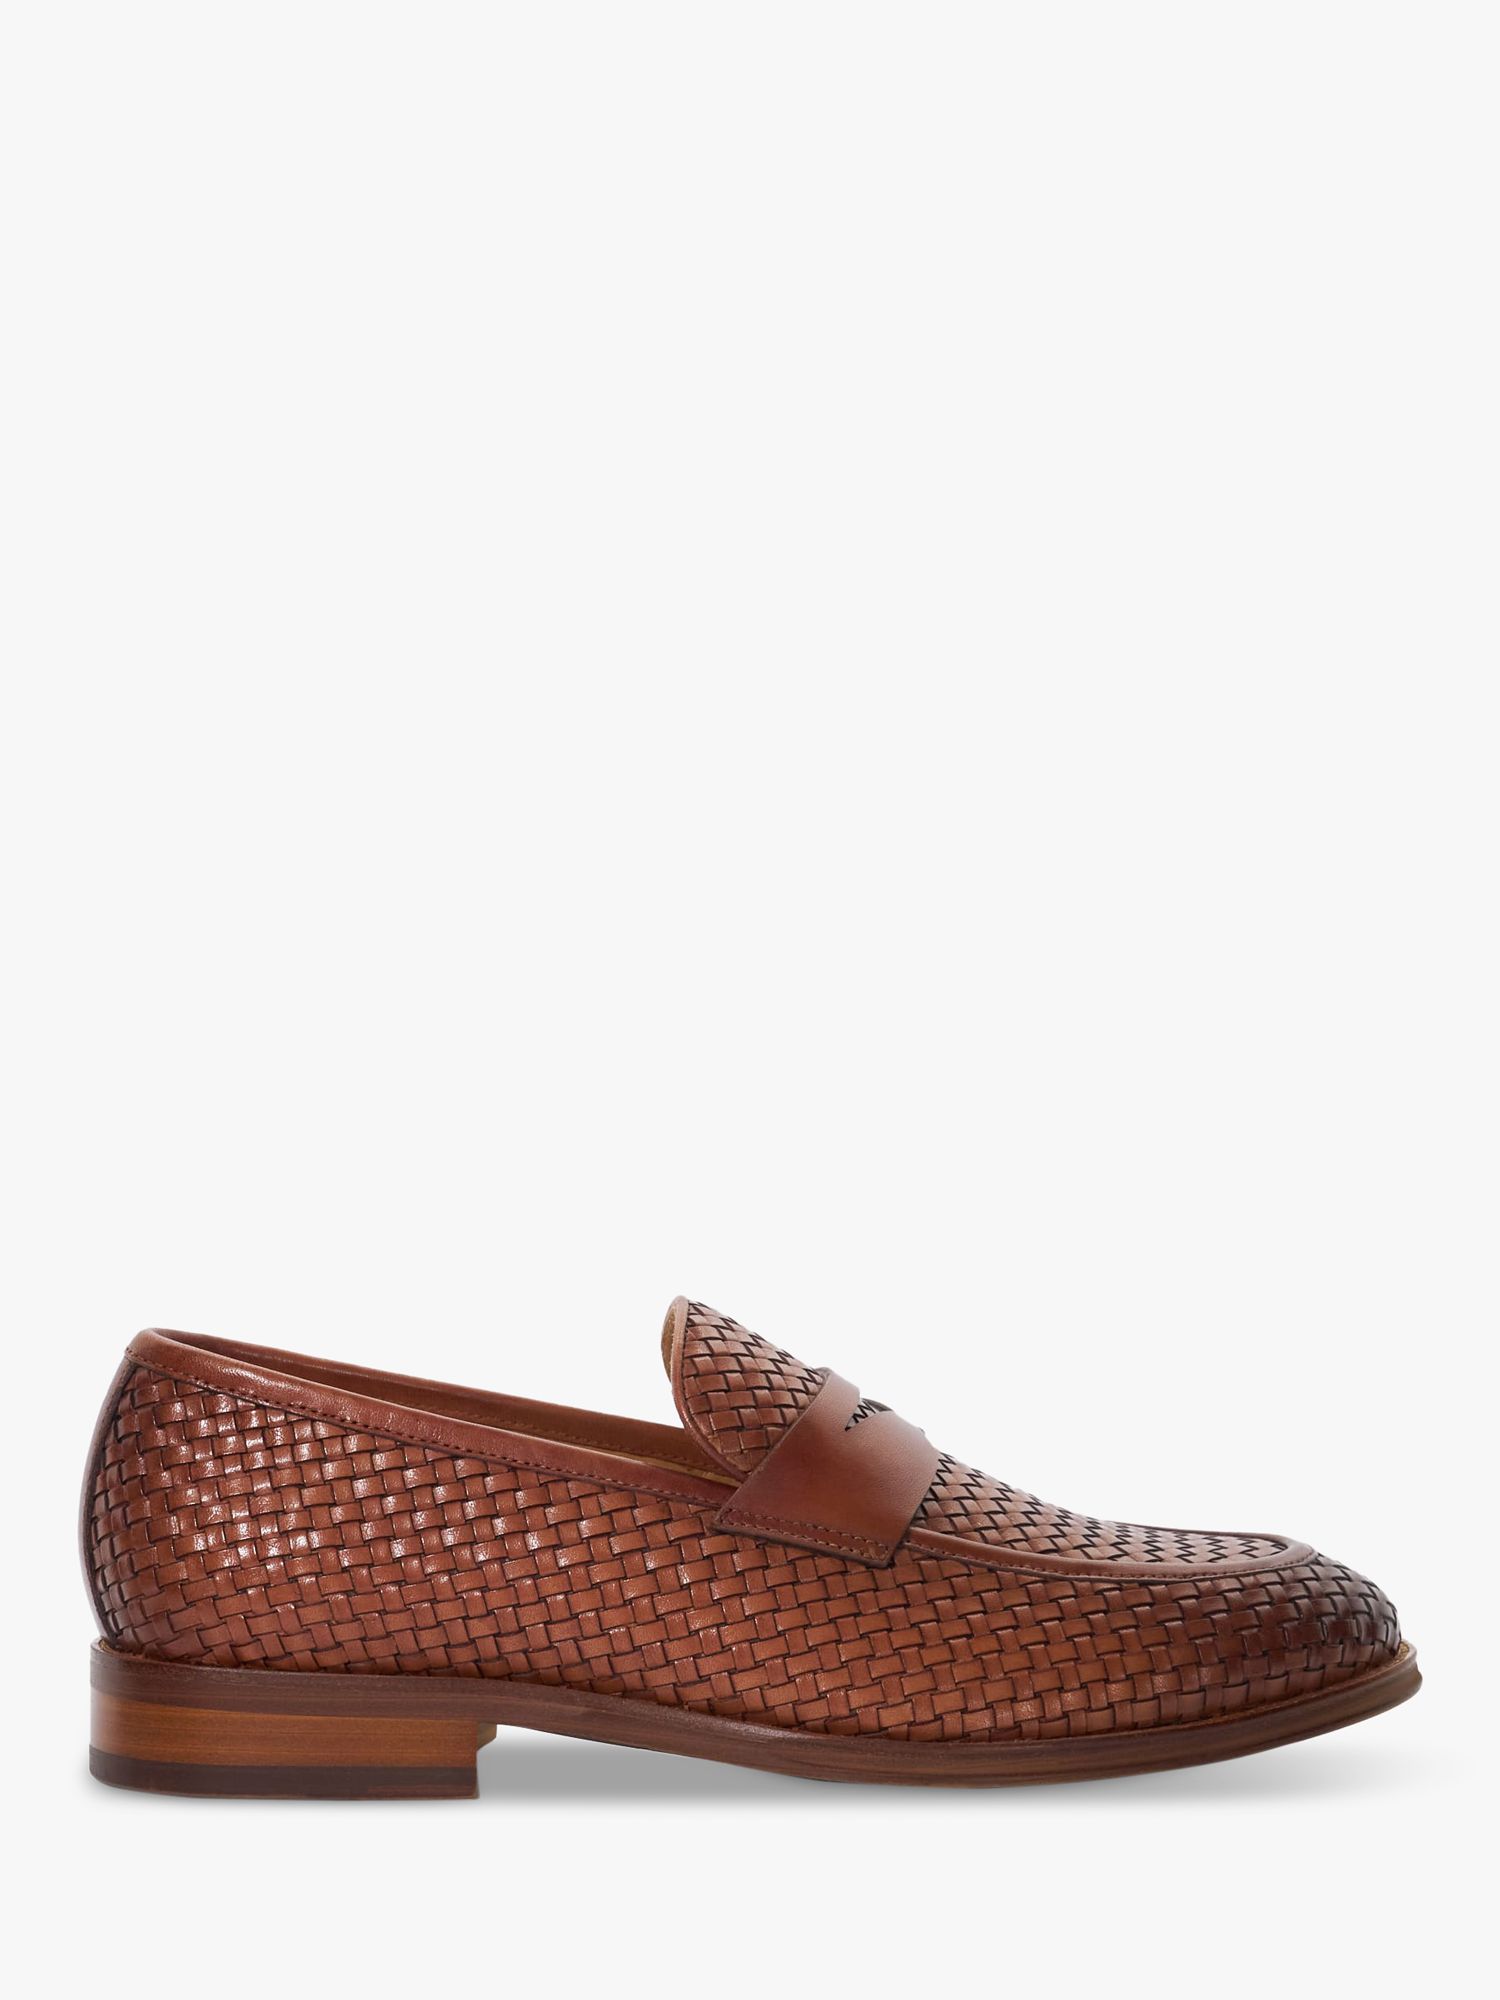 Dune Saharas Leather Penny Loafers, Tan, 6